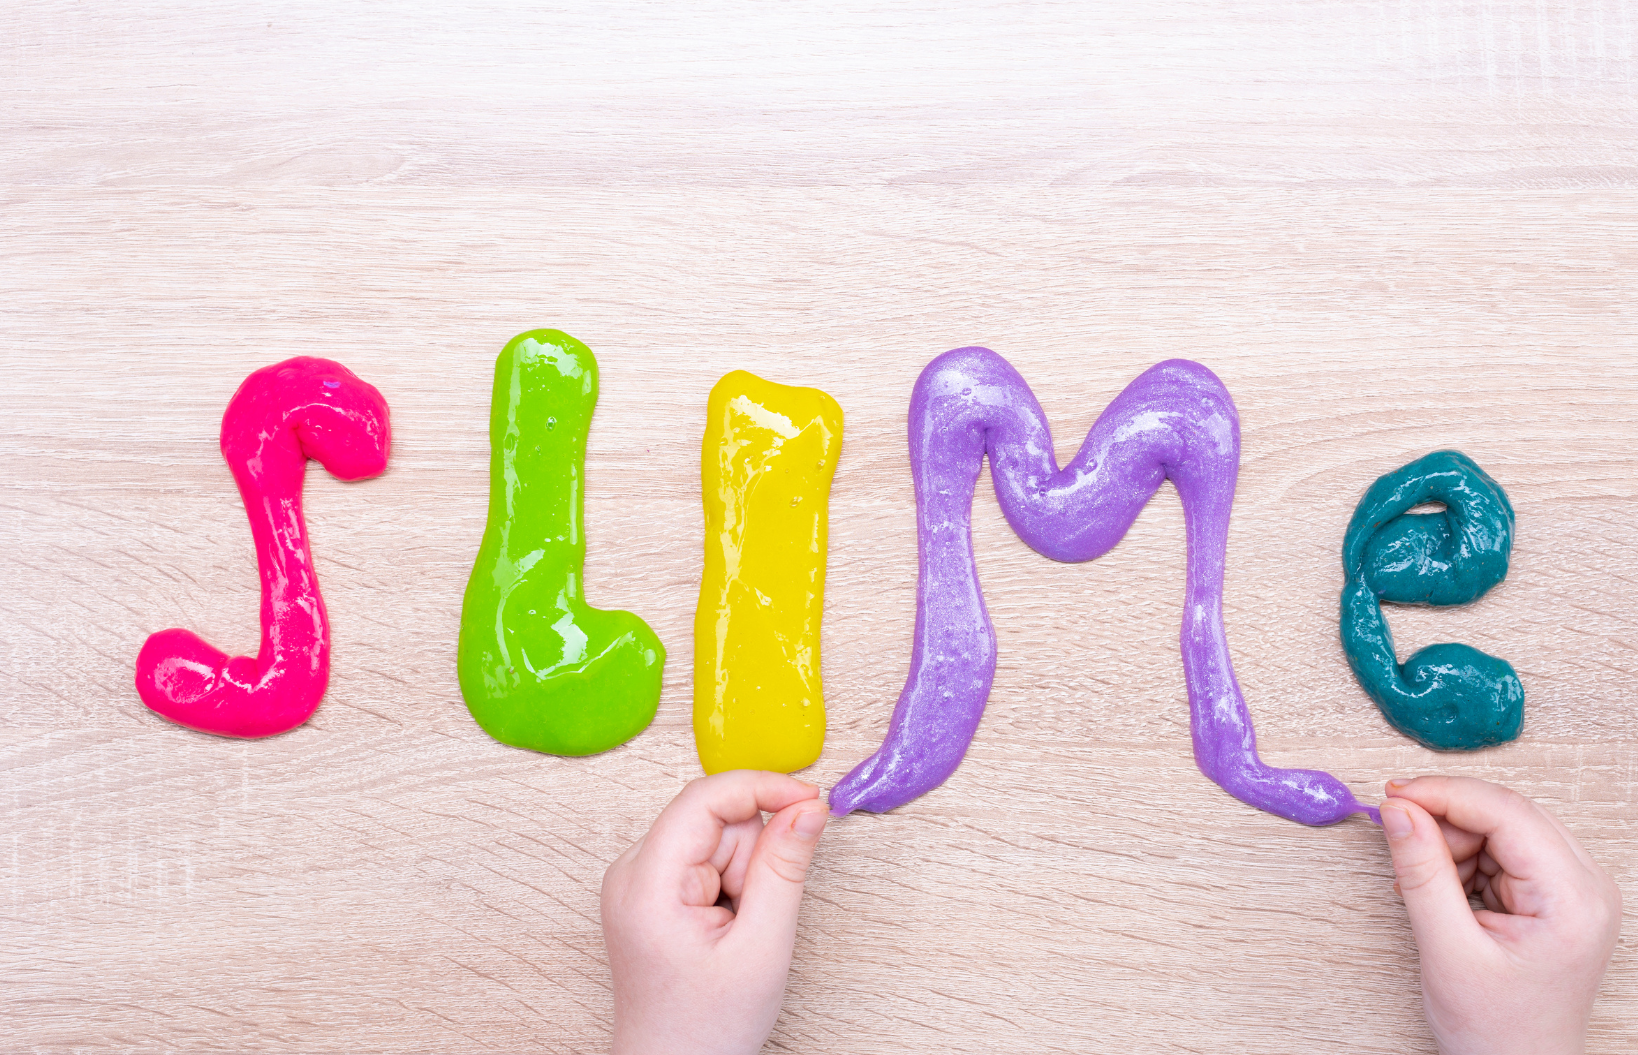 "Slime" spelled out in slime.